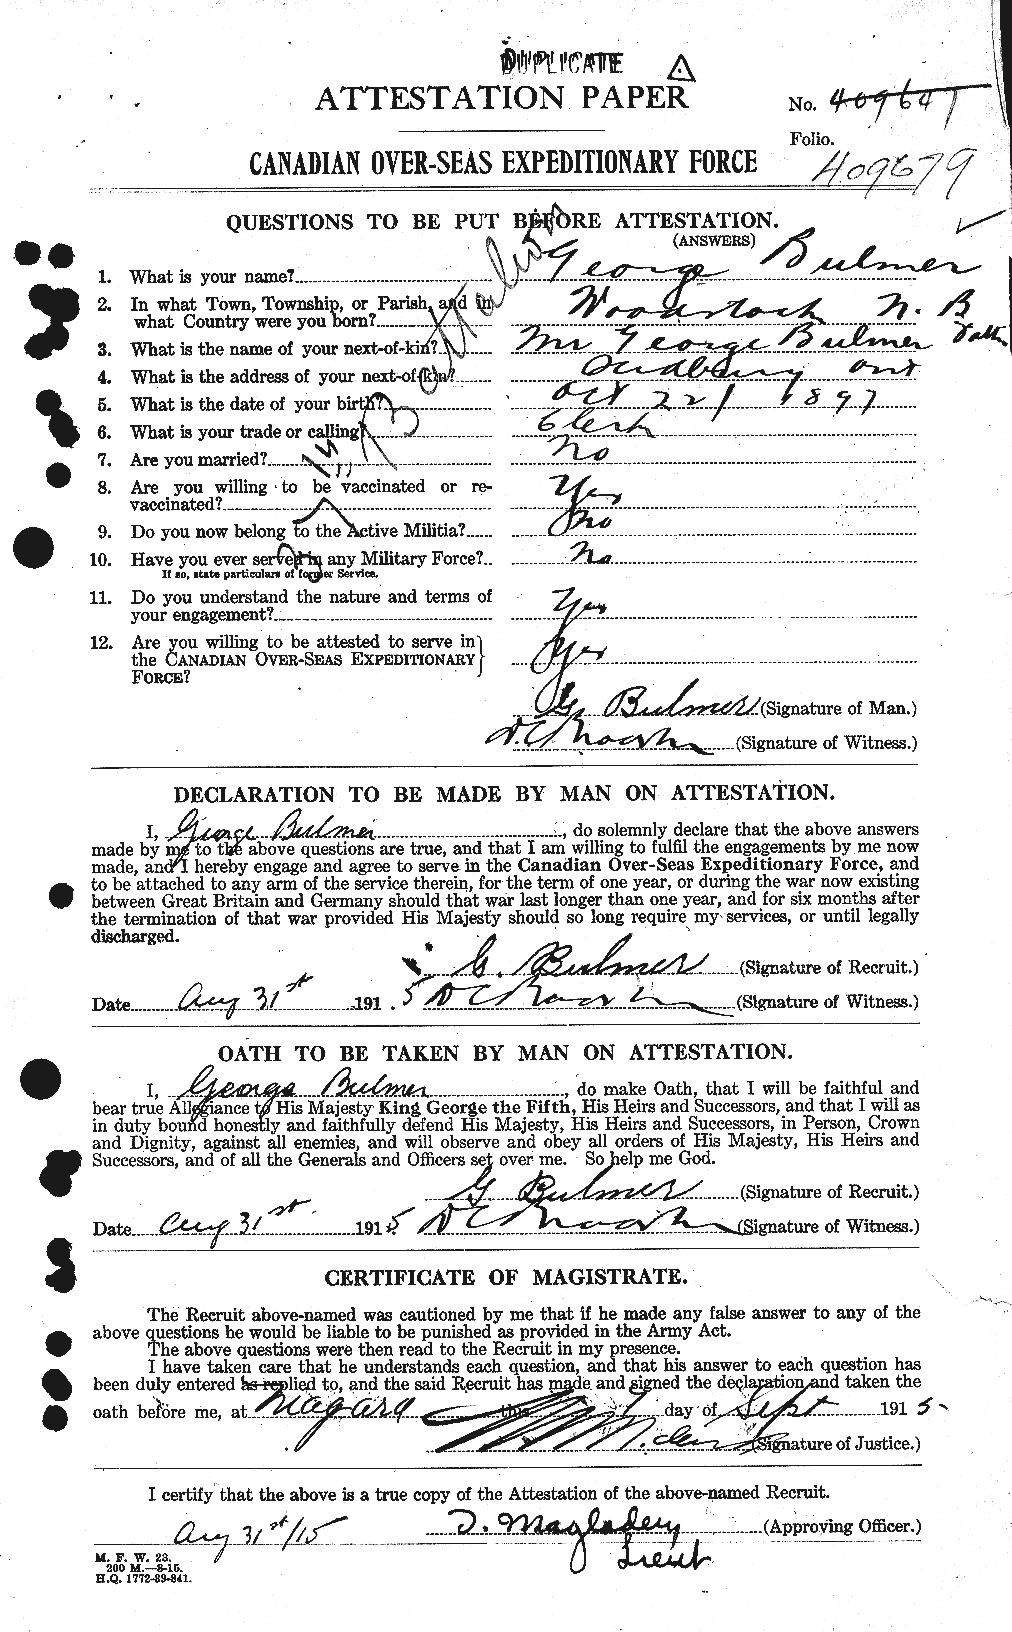 Personnel Records of the First World War - CEF 269809a